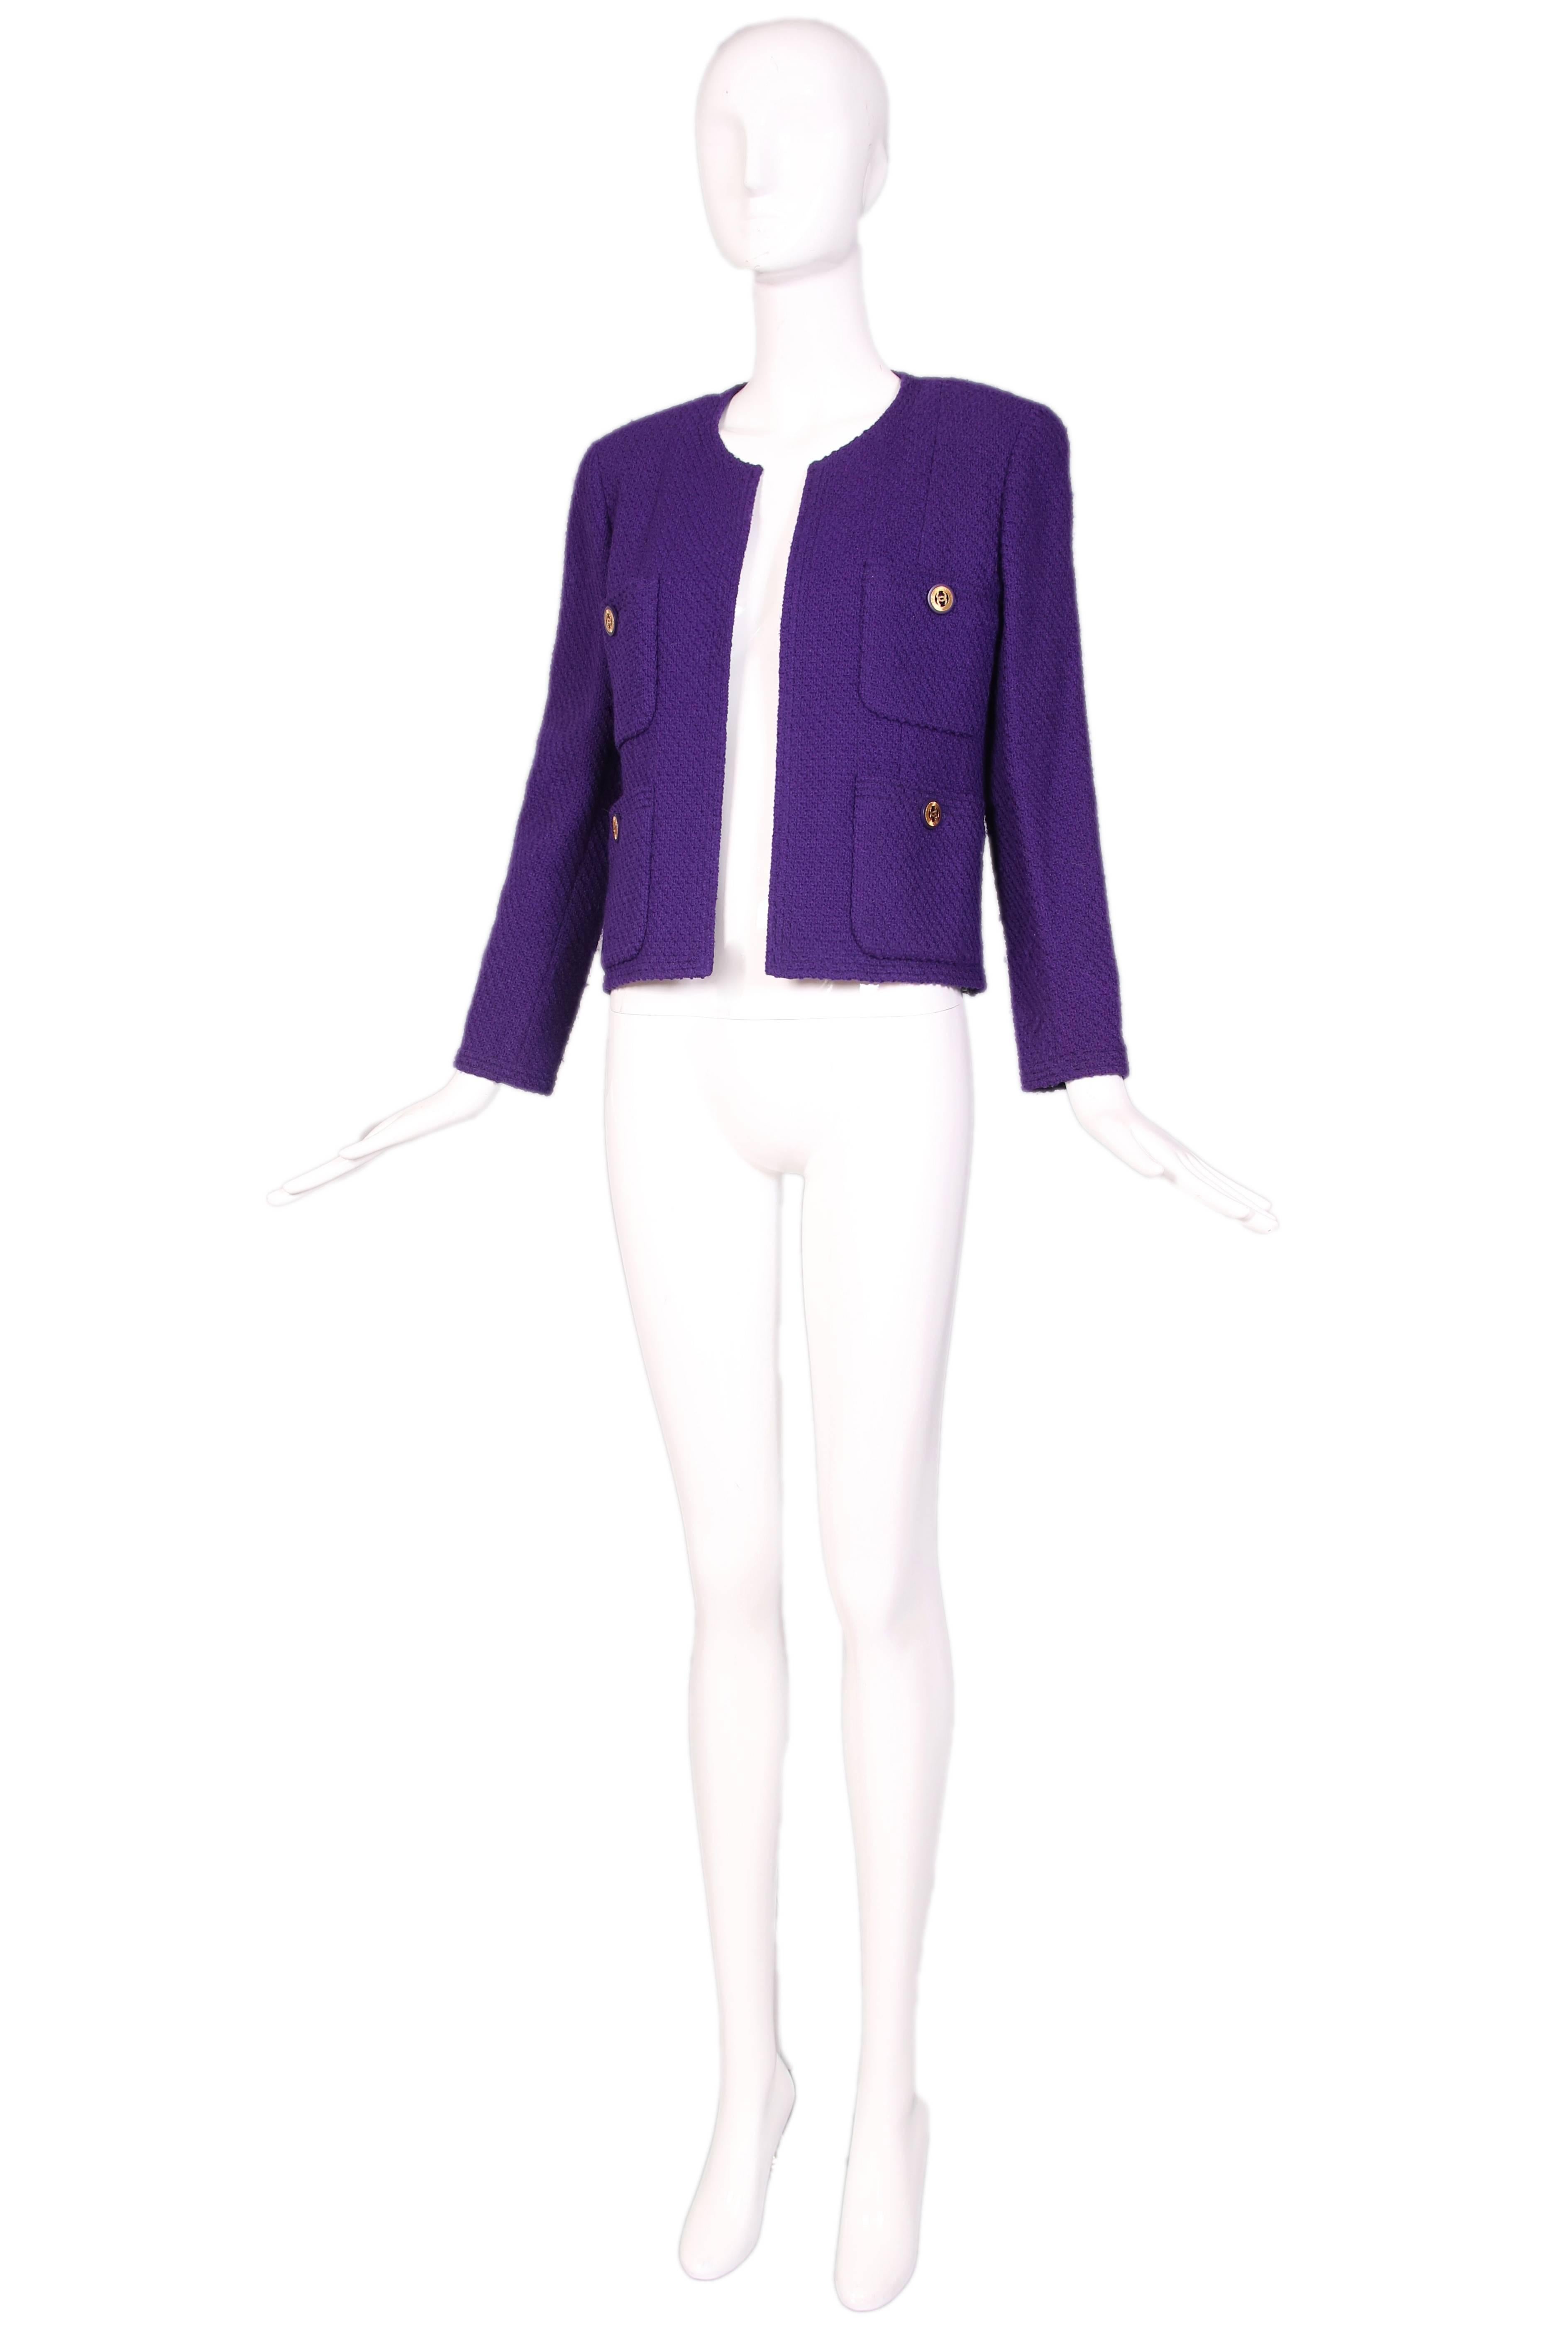 Chanel purple boucle wool open jacket featuring four pockets with Chanel logo buttons and interior lined with bejeweled winged clock print fabric. Jacket comes with dropped waist skirt that features both frontal and back overlay panels. Both labeled